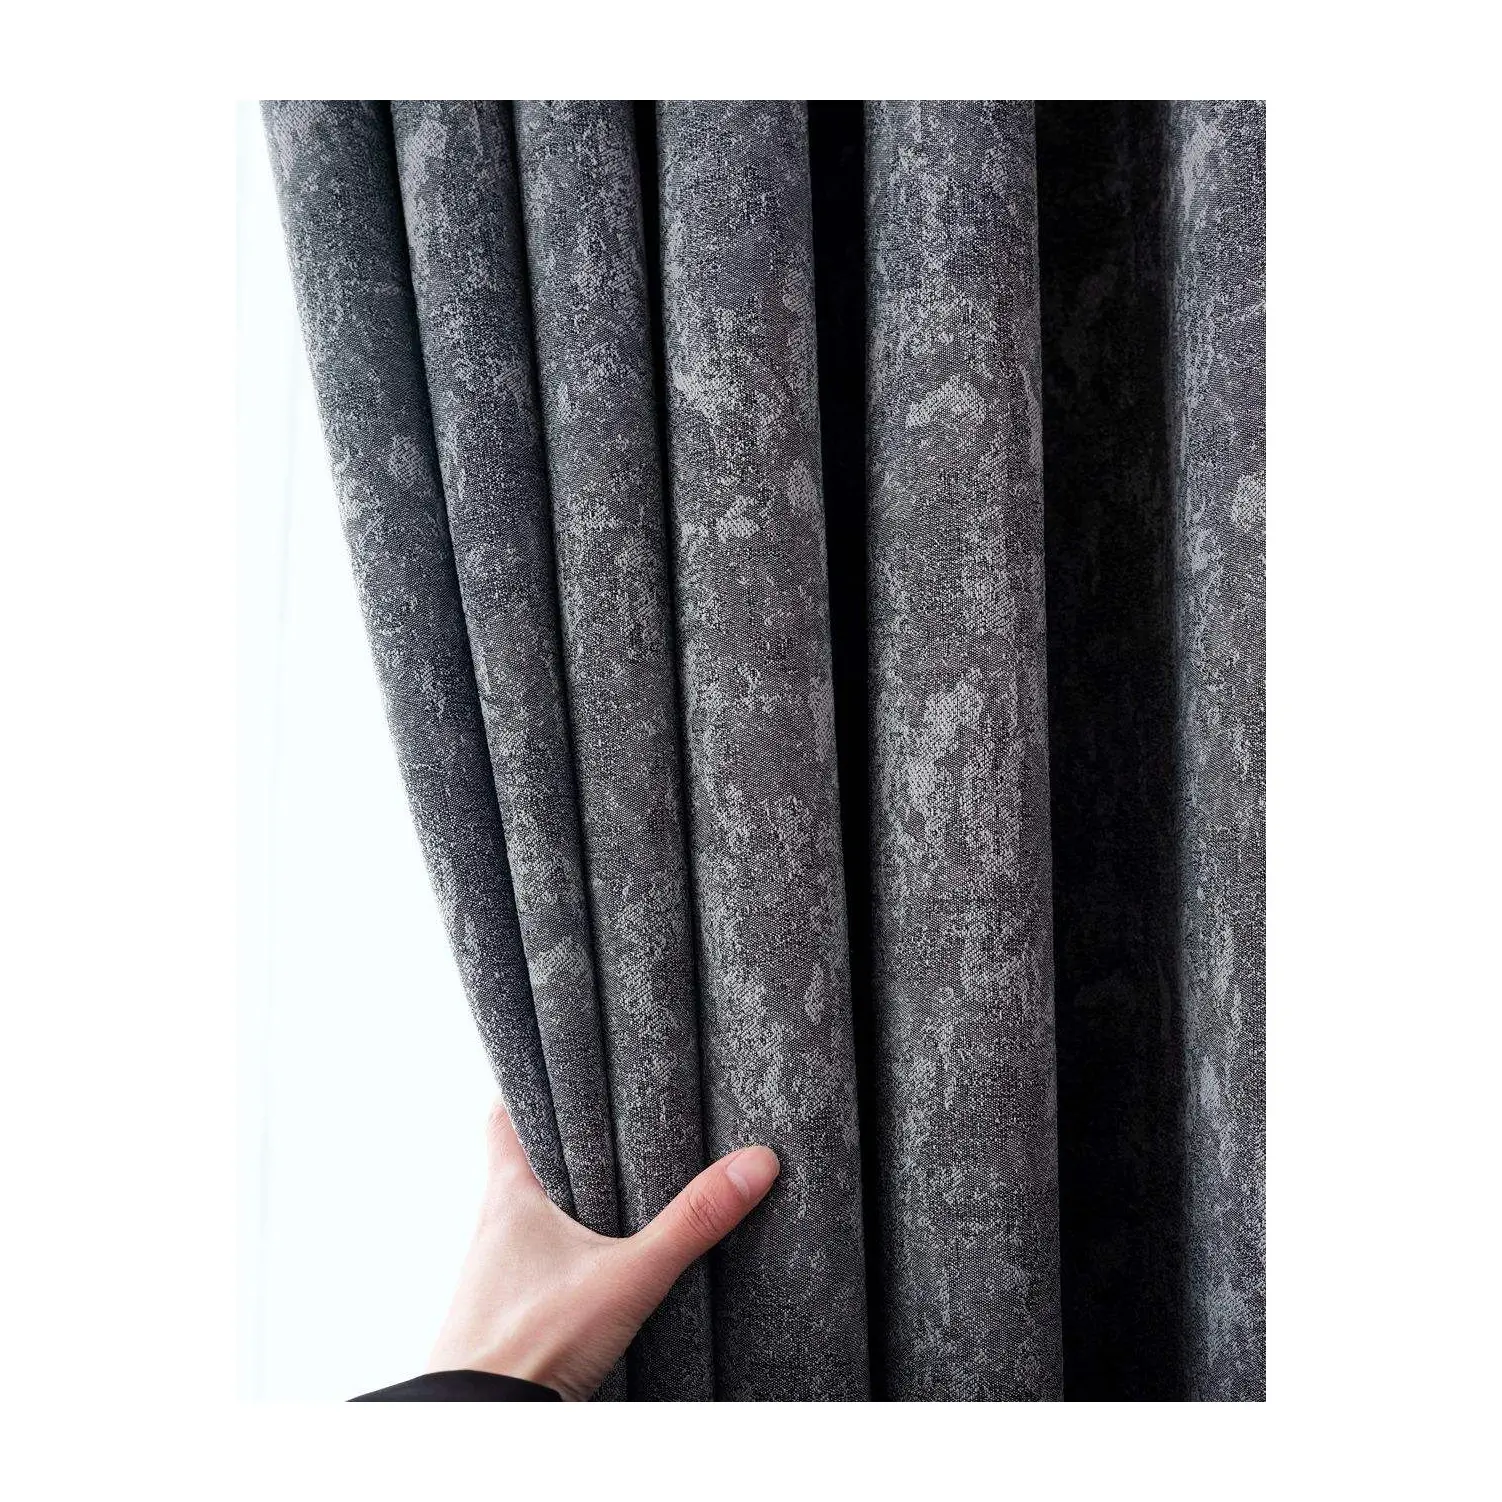 Ready goods all our website Moq 1 Roll Jacquard wave design curtain material fabric For Luxury living Room